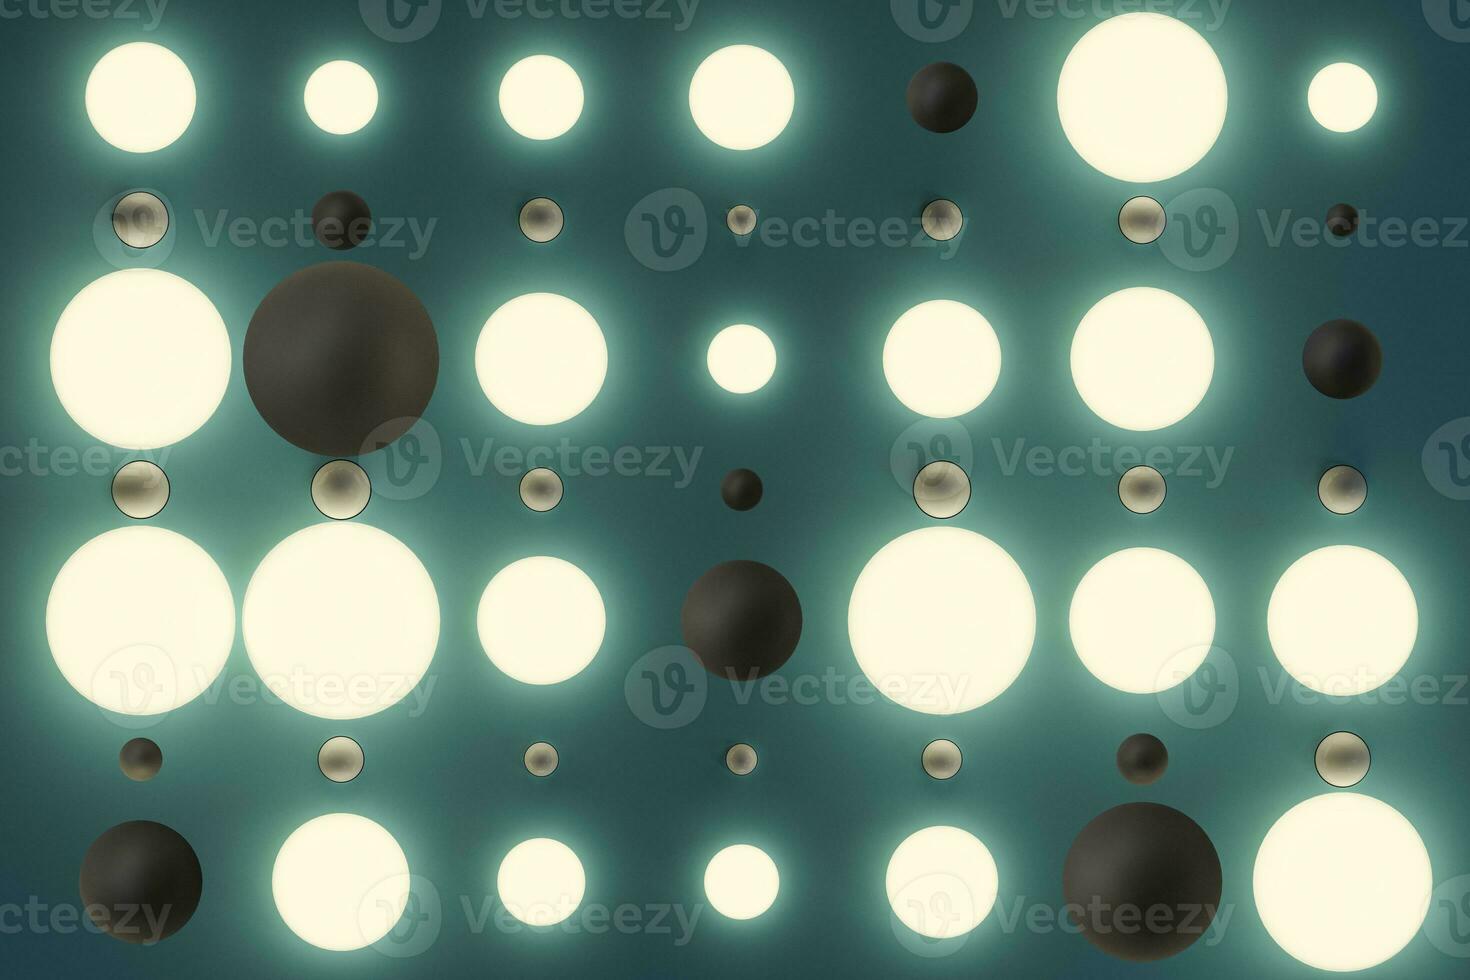 Lots of repeating spheres and wall, 3d rendering. photo